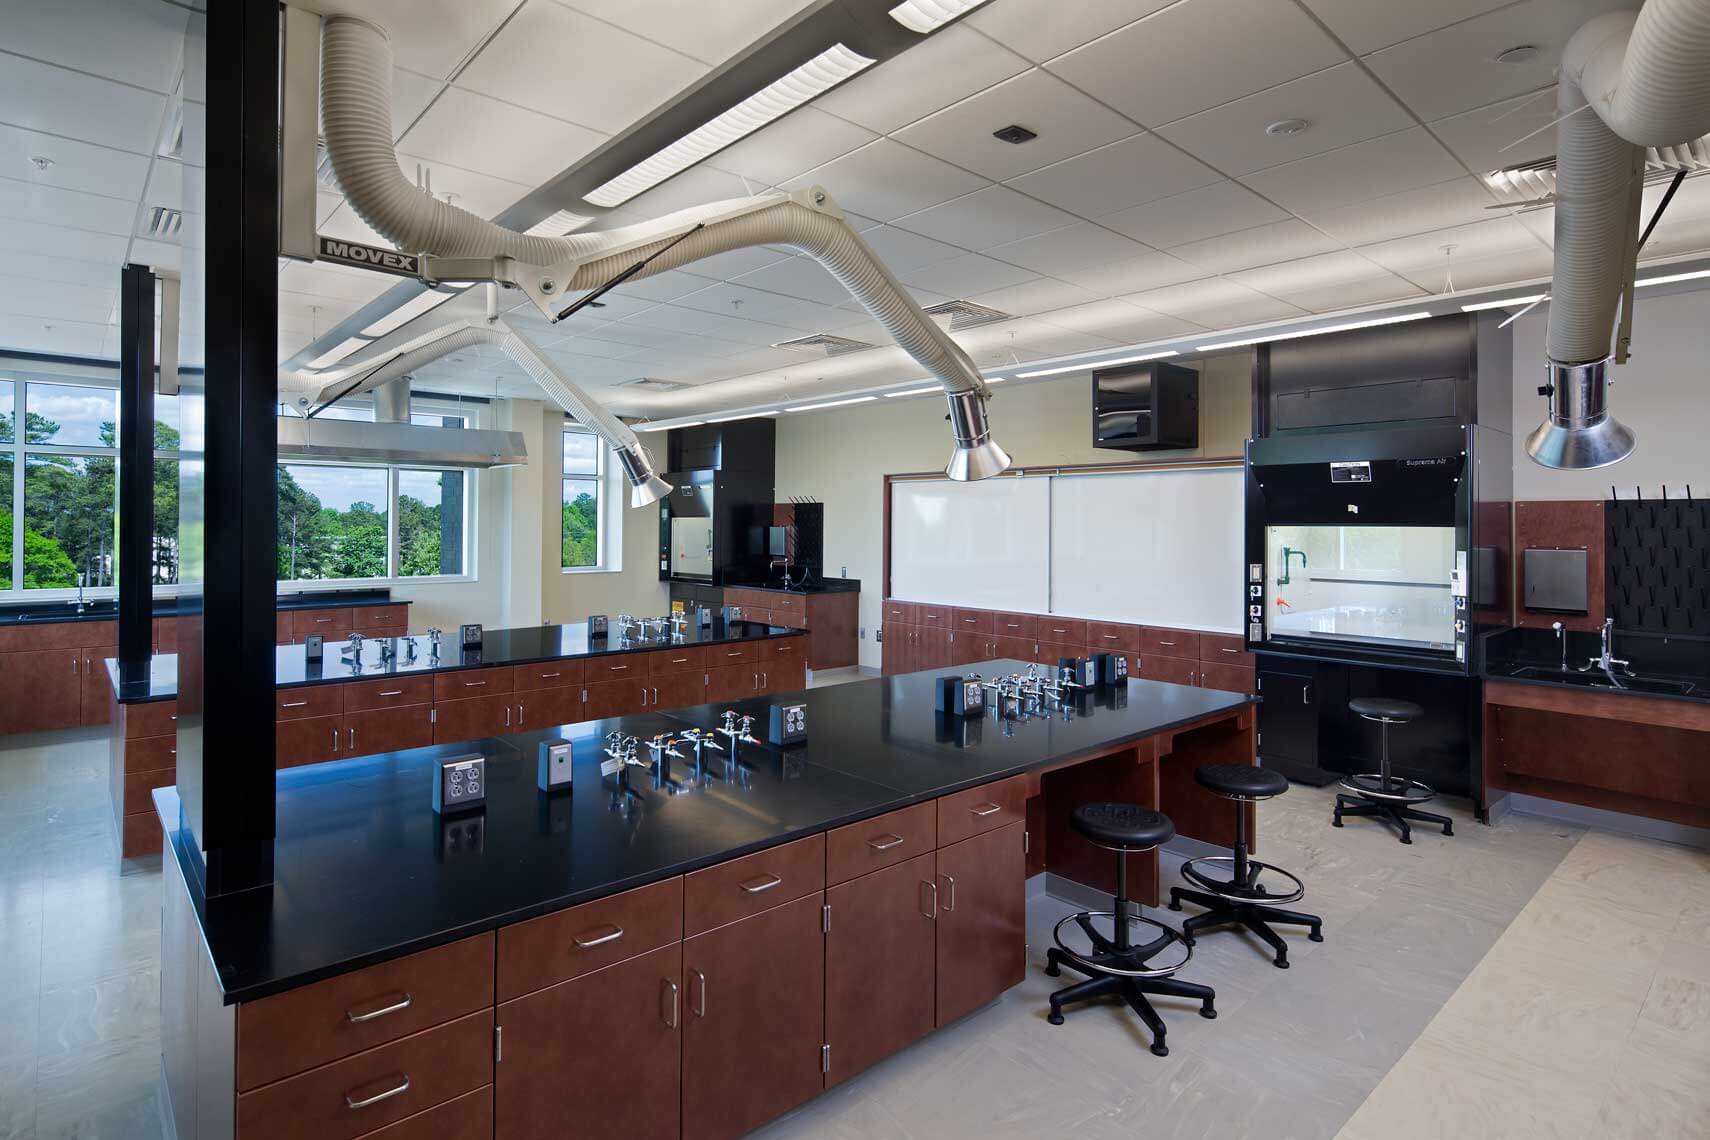 A view of a well-equipped lab at the Midlands Tech Engineering & Science building